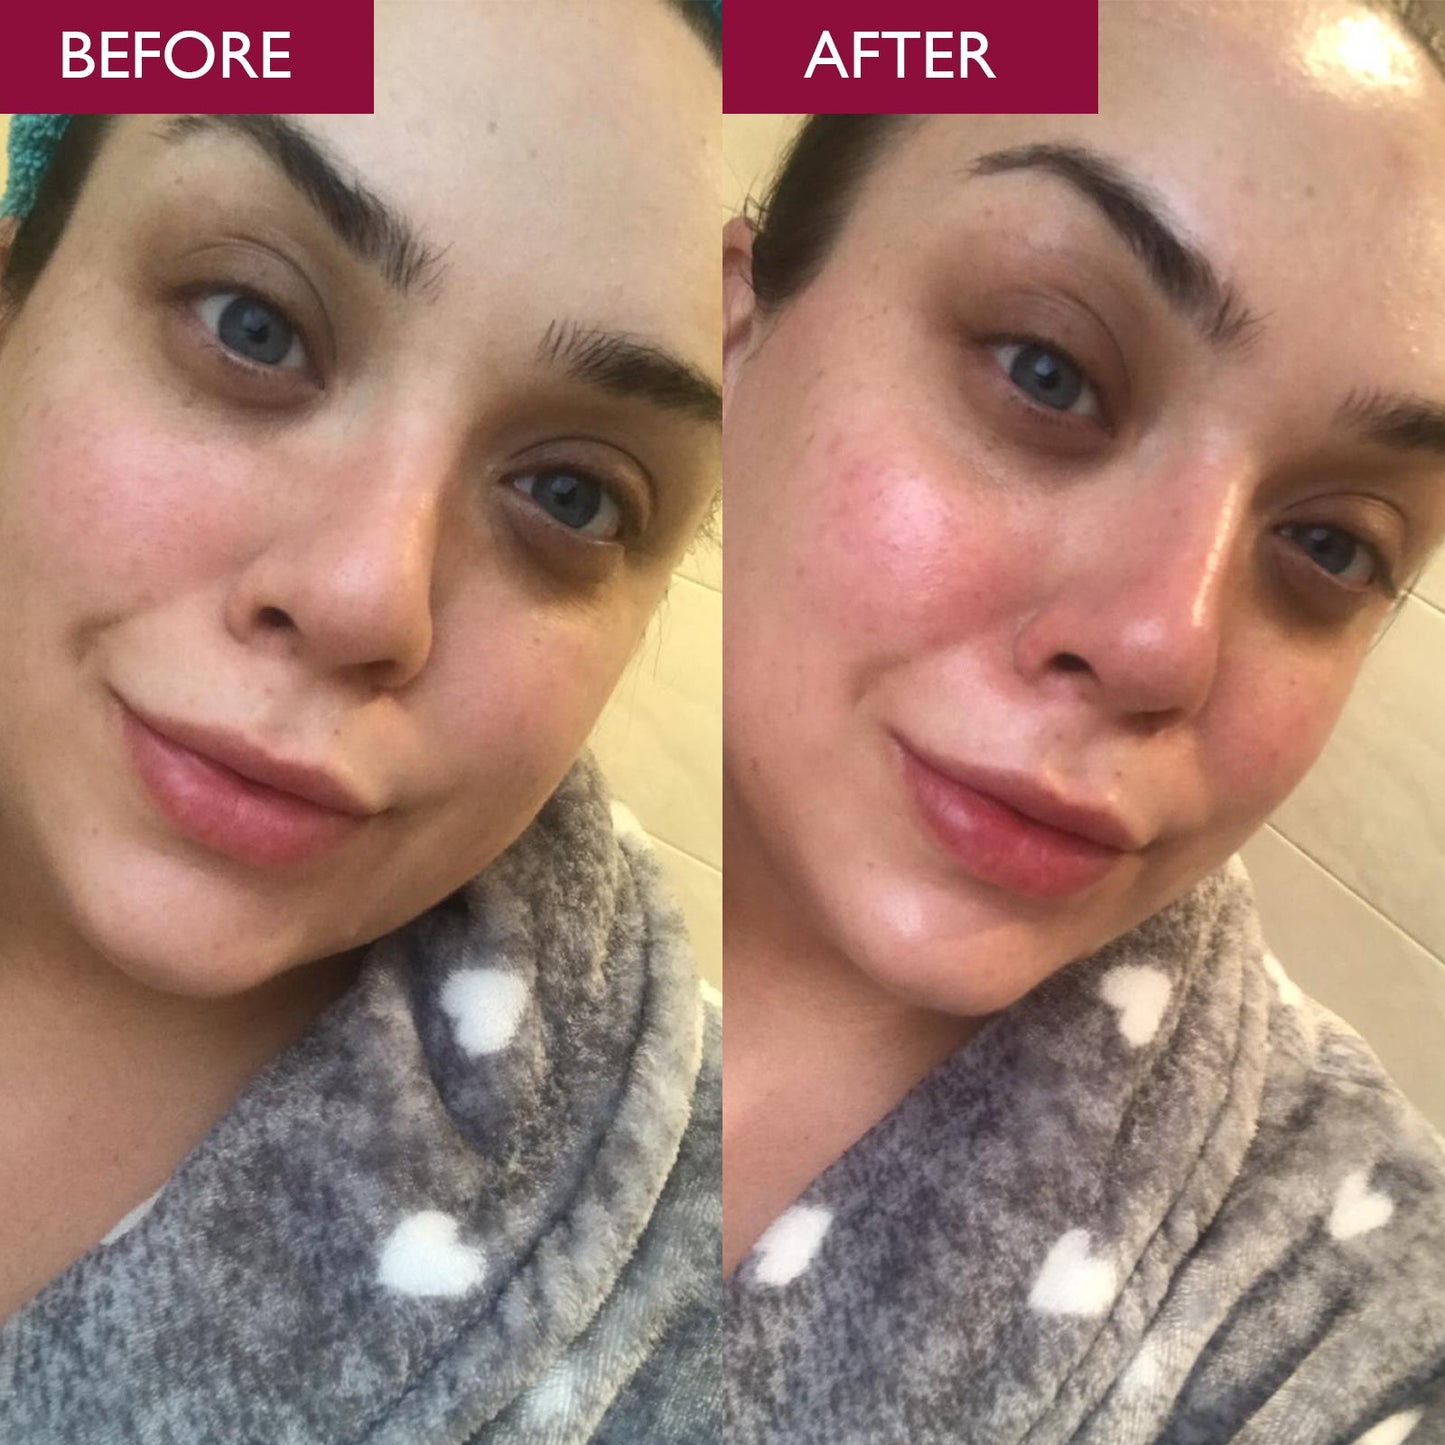 Before and After pictures of a lady having brighter skin after using Skinician enzymatic cleanser